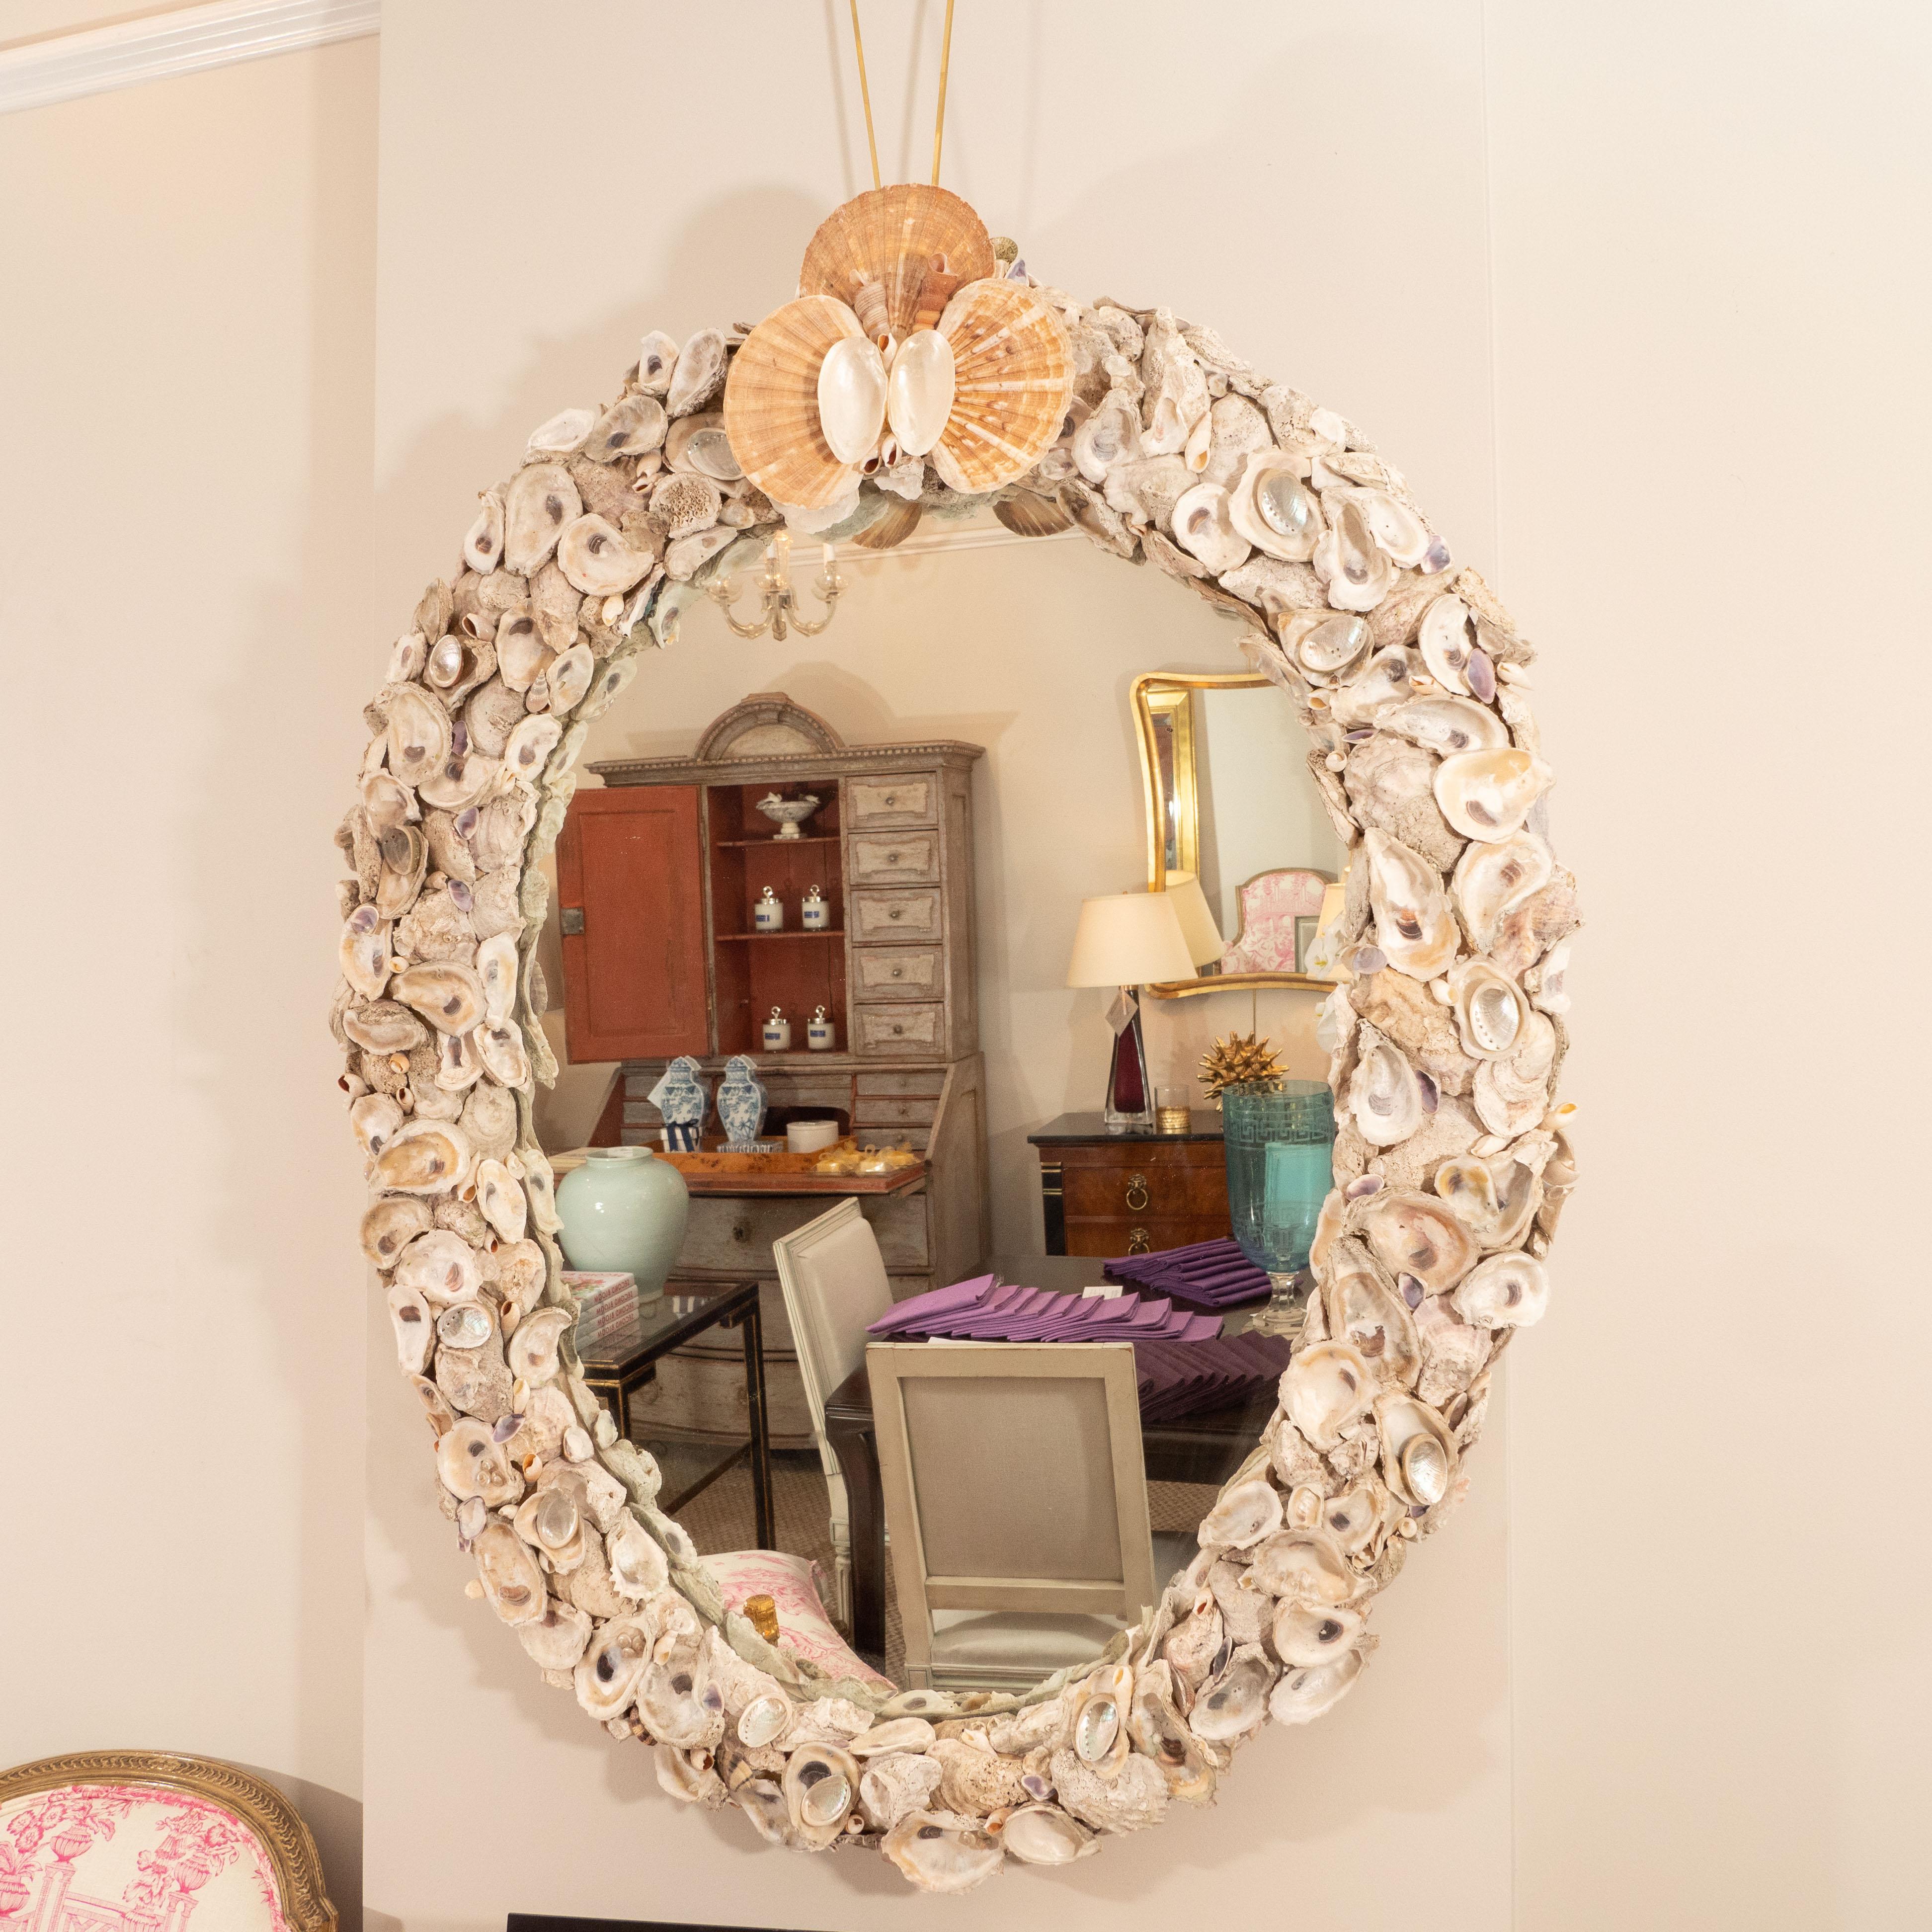 At a beach setting (or not!), this mirror is a statement piece! Large and oval in shape, the mirror is made up of sea shells (oysters, clams and others) with a large cluster at the top. We have seen a lot of examples of shell mirrors, but this one